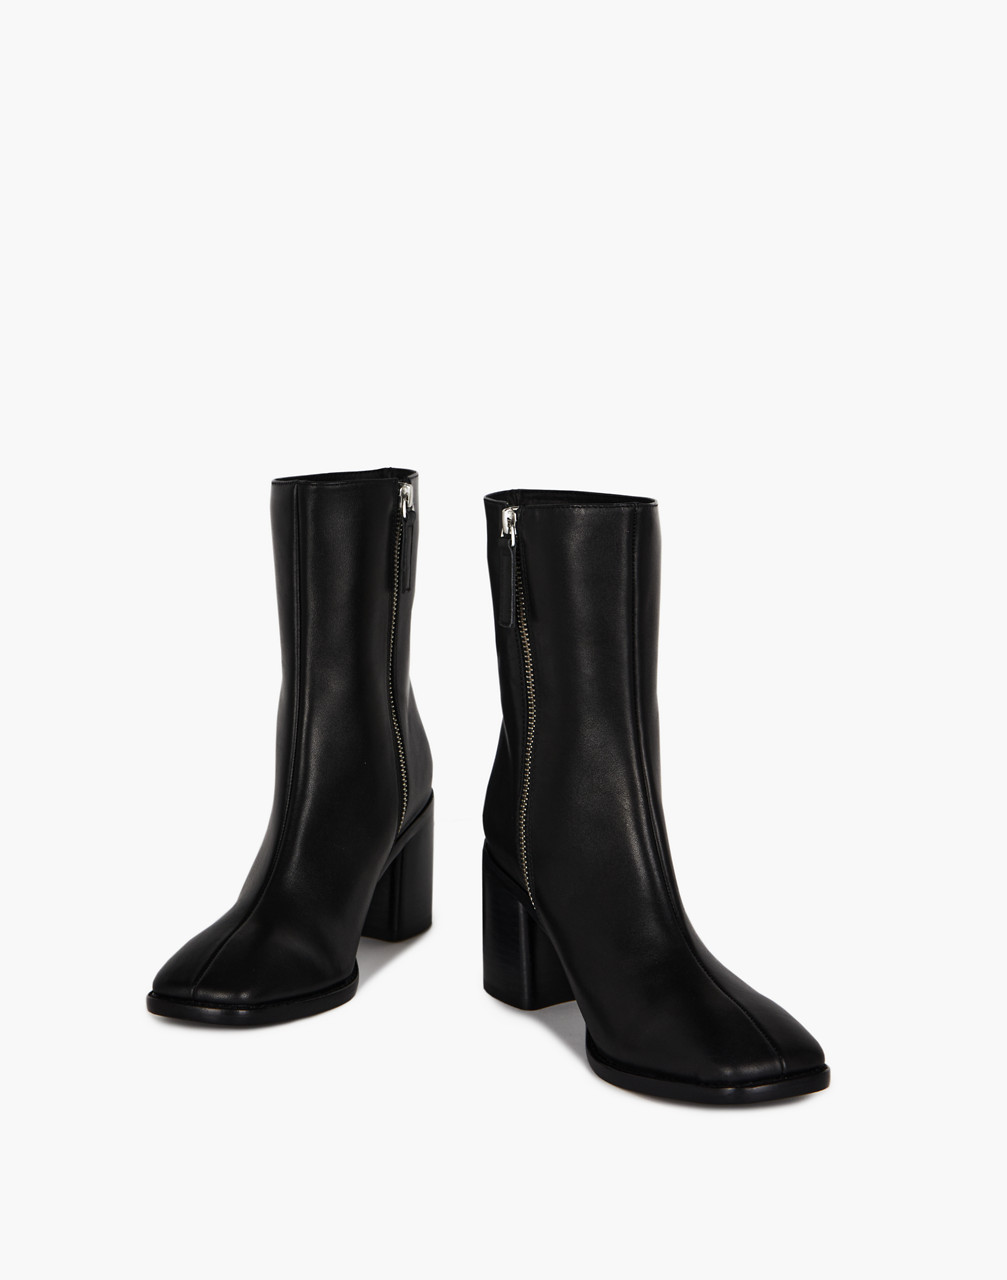 Mw Intentionally Blank Leather Contour Boots In Black